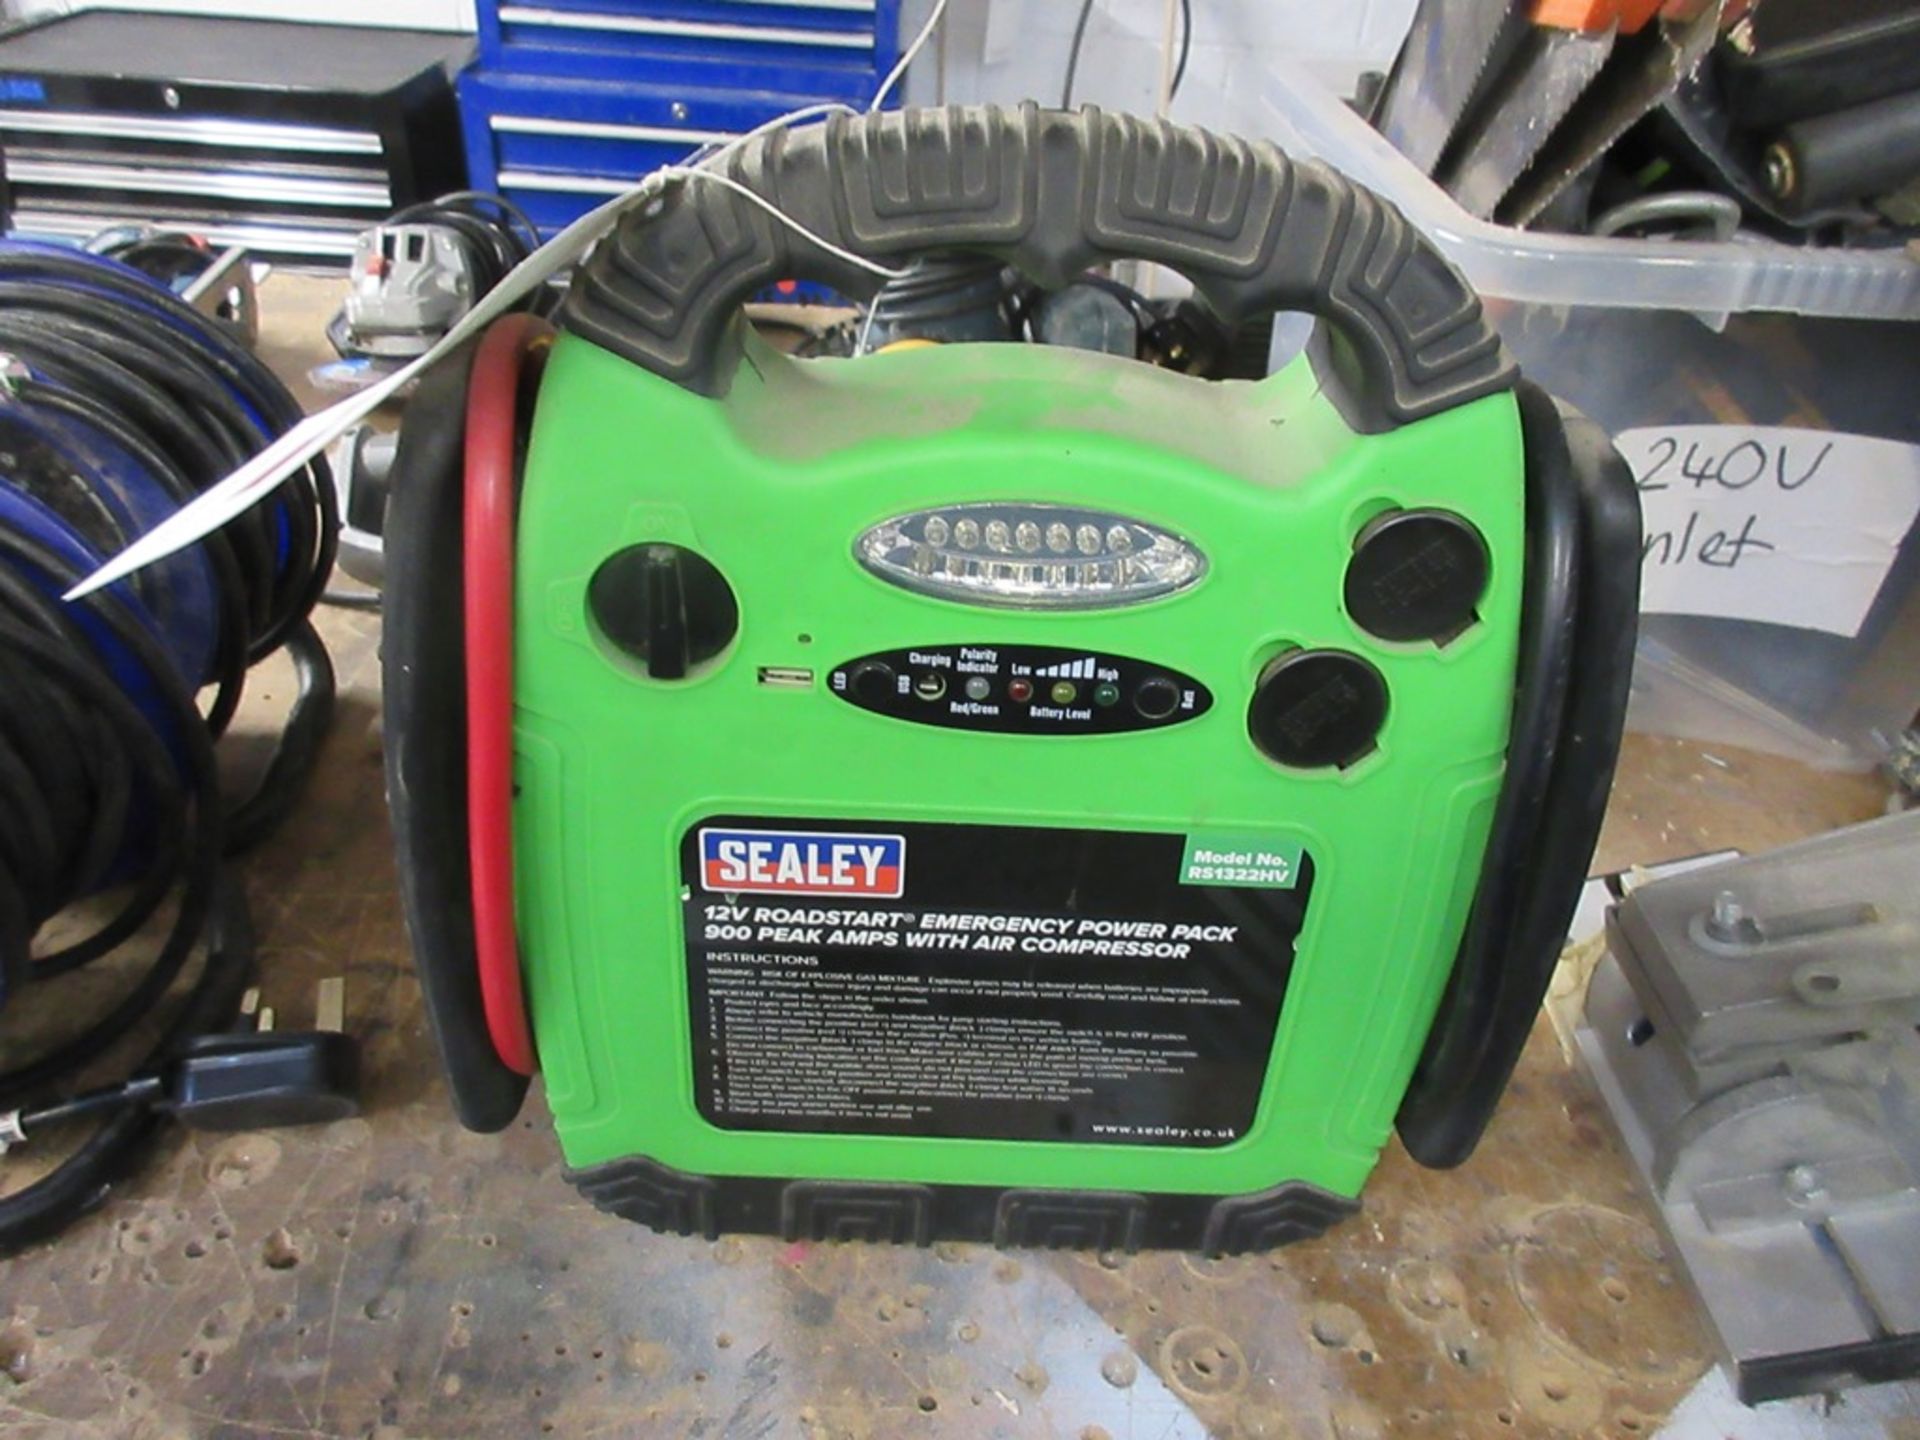 Sealey 12 volt battery jump pack, model RS1322HV with air compressor